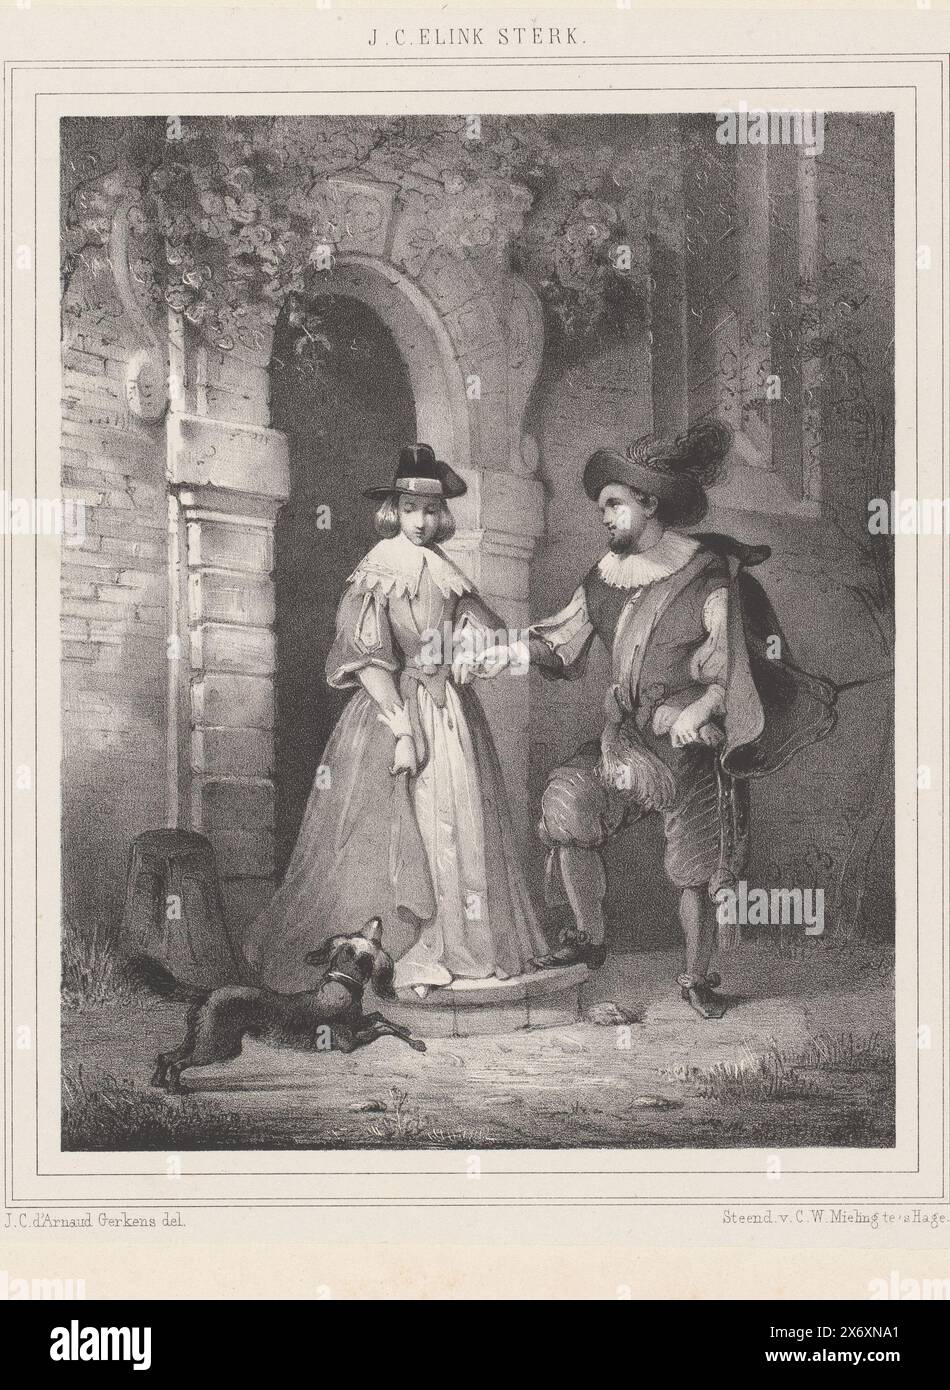 Young couple and dog at a door, both figures wear seventeenth-century ...